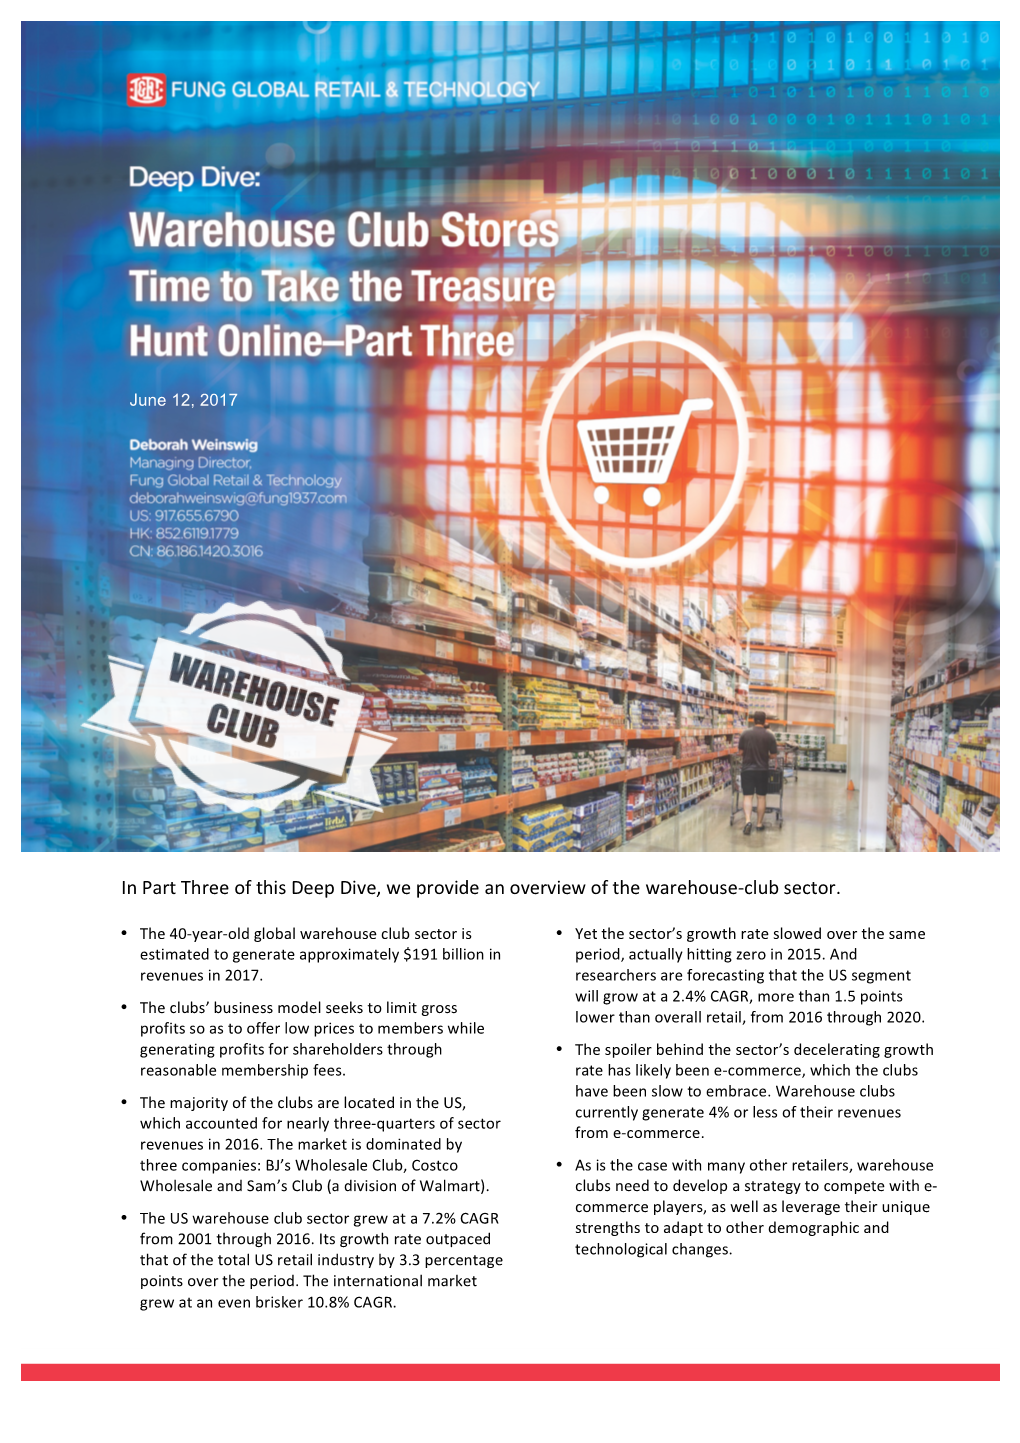 In Part Three of This Deep Dive, We Provide an Overview of the Warehouse-Club Sector